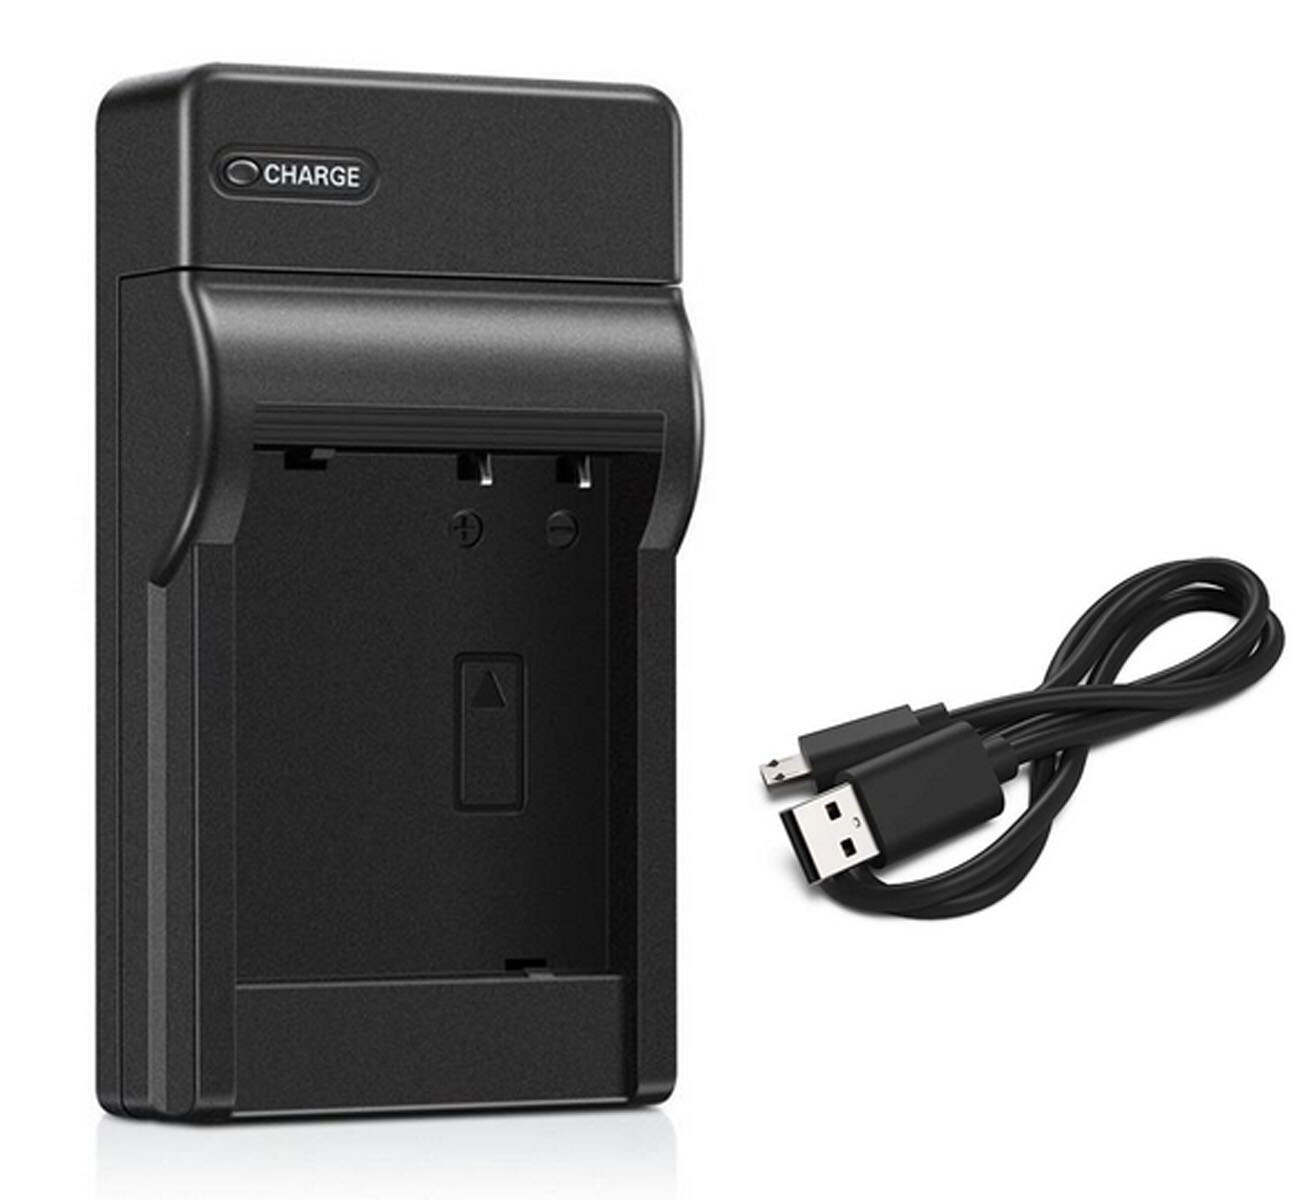 Batterij Lader Voor Nikon Coolpix AW110s, AW120s, AW130s, W300, B600, A900, A1000 Digitale Camera: 1x Micro USB Charger